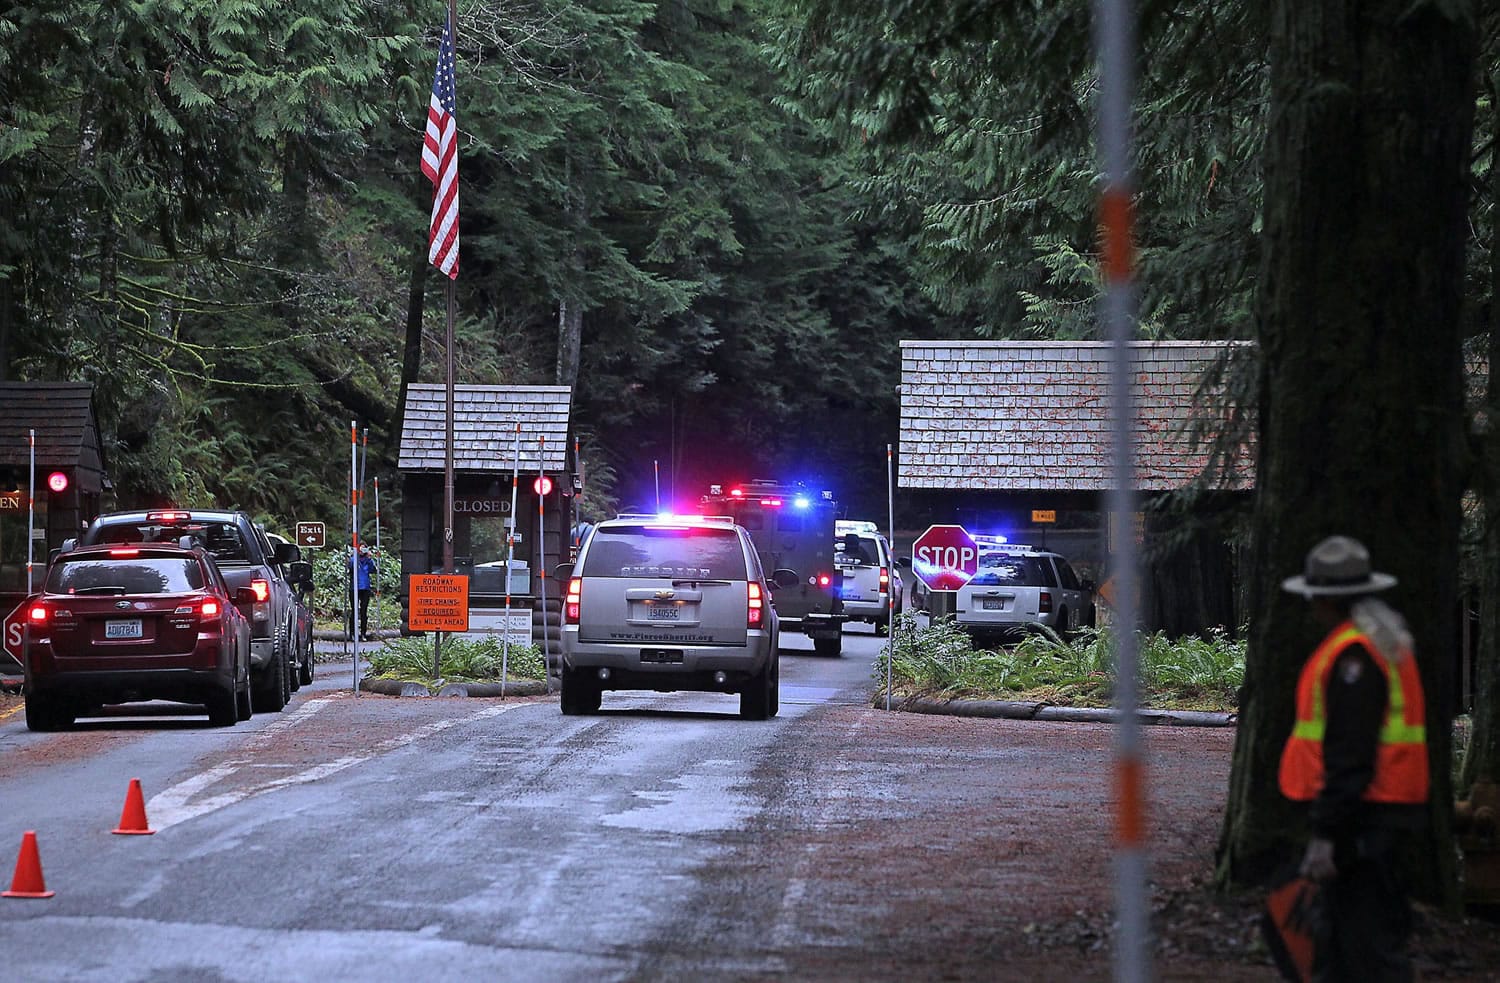 Police are searching for a suspect in the shooting of a Mount Rainier National Park ranger on Sunday.